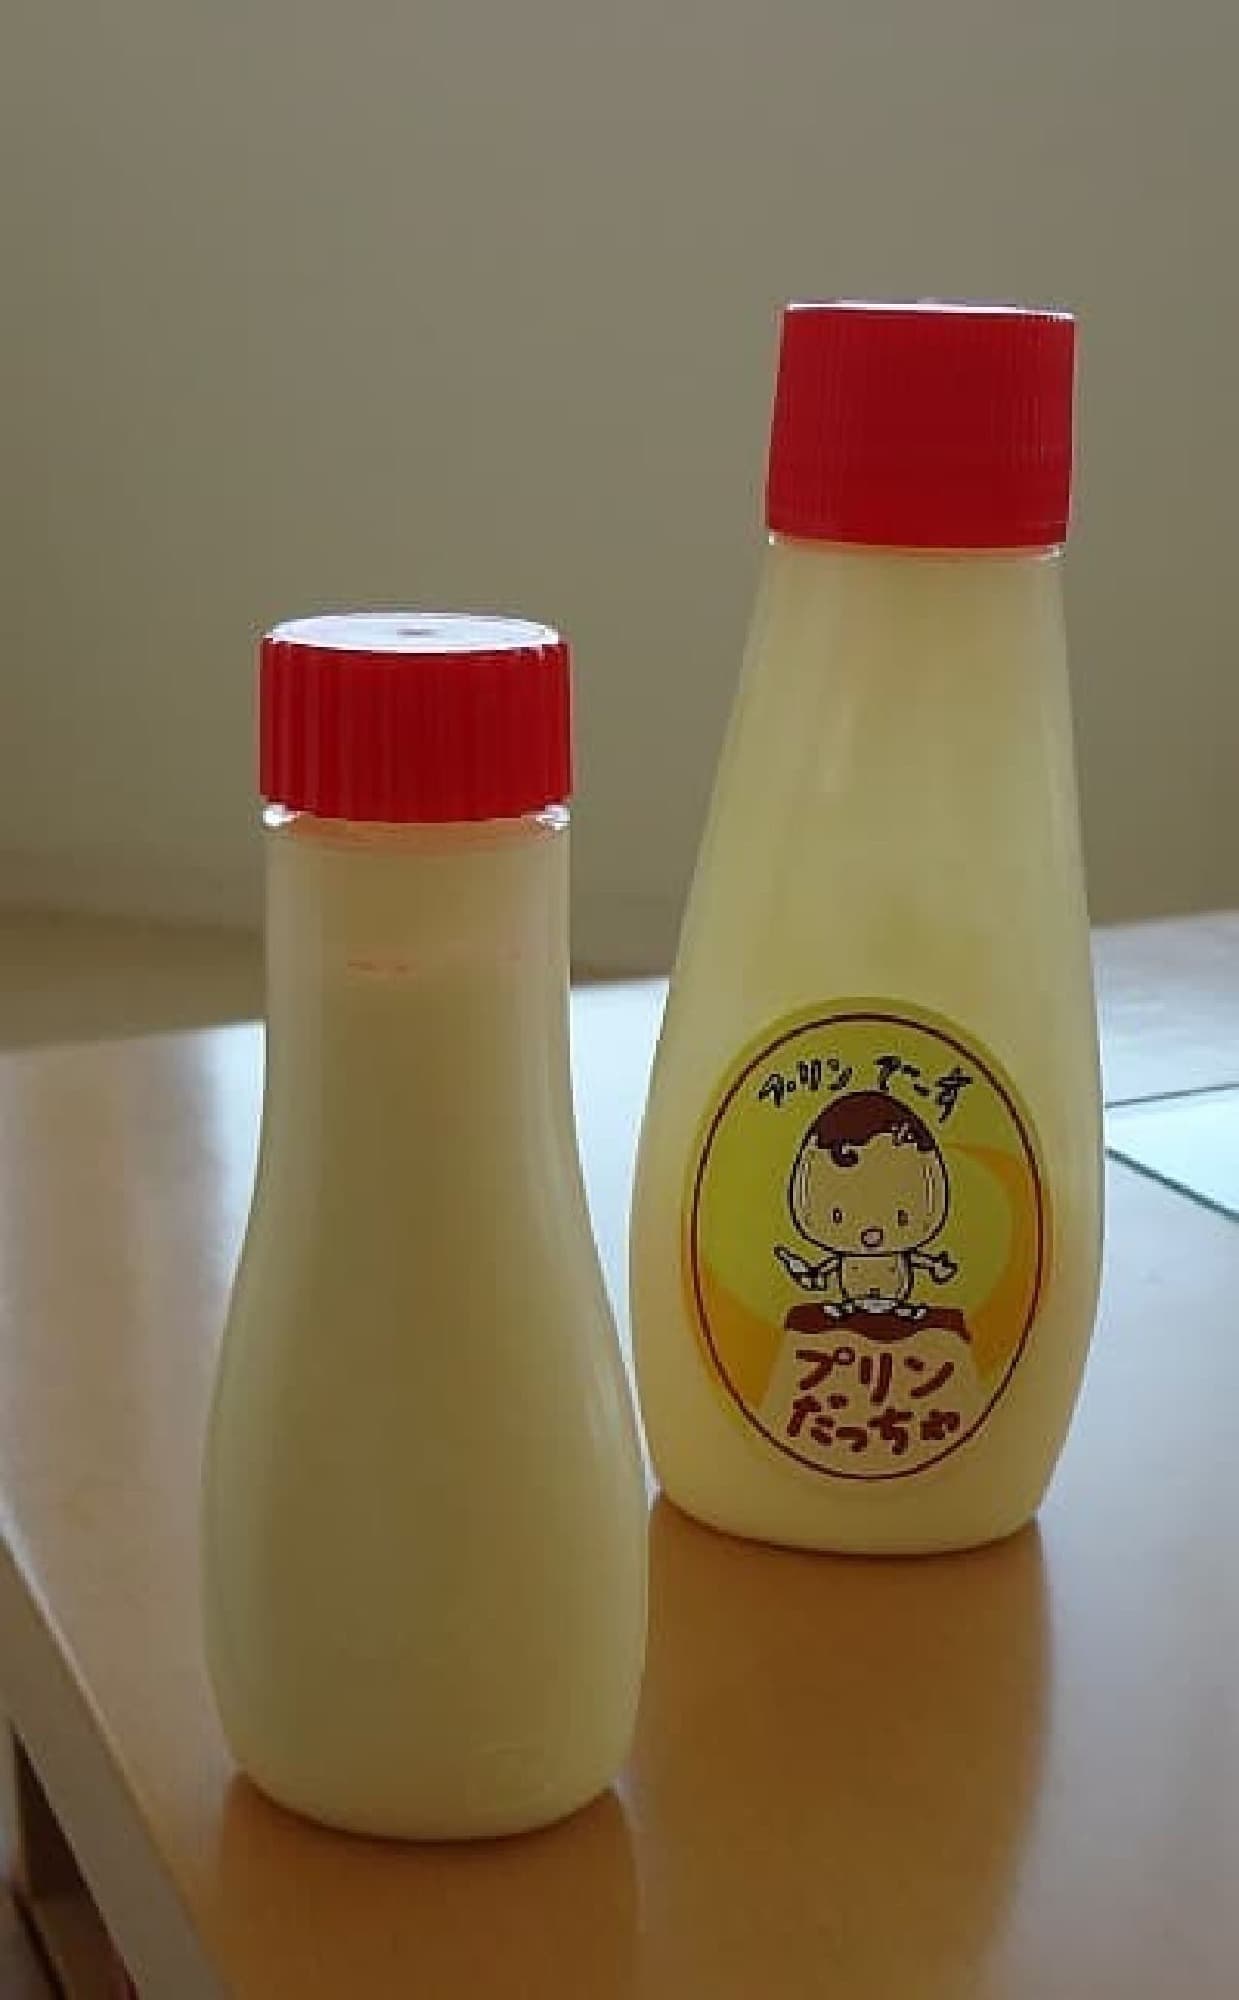 Mayonnaise on the left and "Purindaccha" on the right.